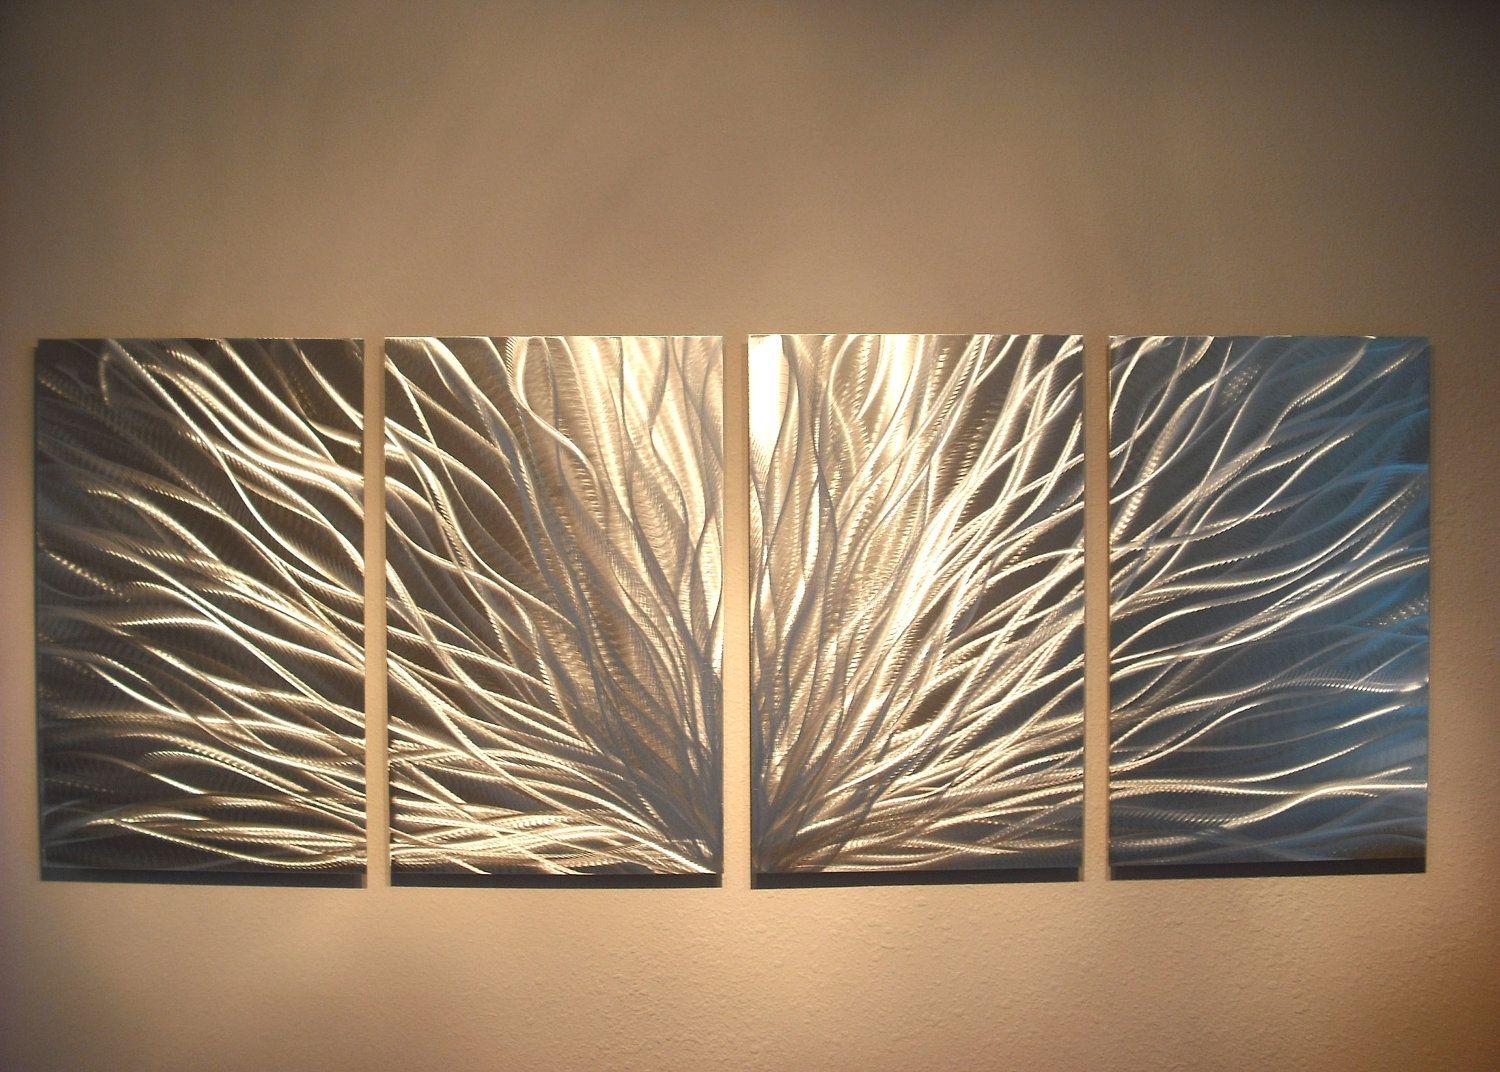 Radiance – Abstract Metal Wall Art Contemporary Modern Decor On Storenvy With Regard To Most Recent Contemporary Wall Art Decors (View 1 of 20)